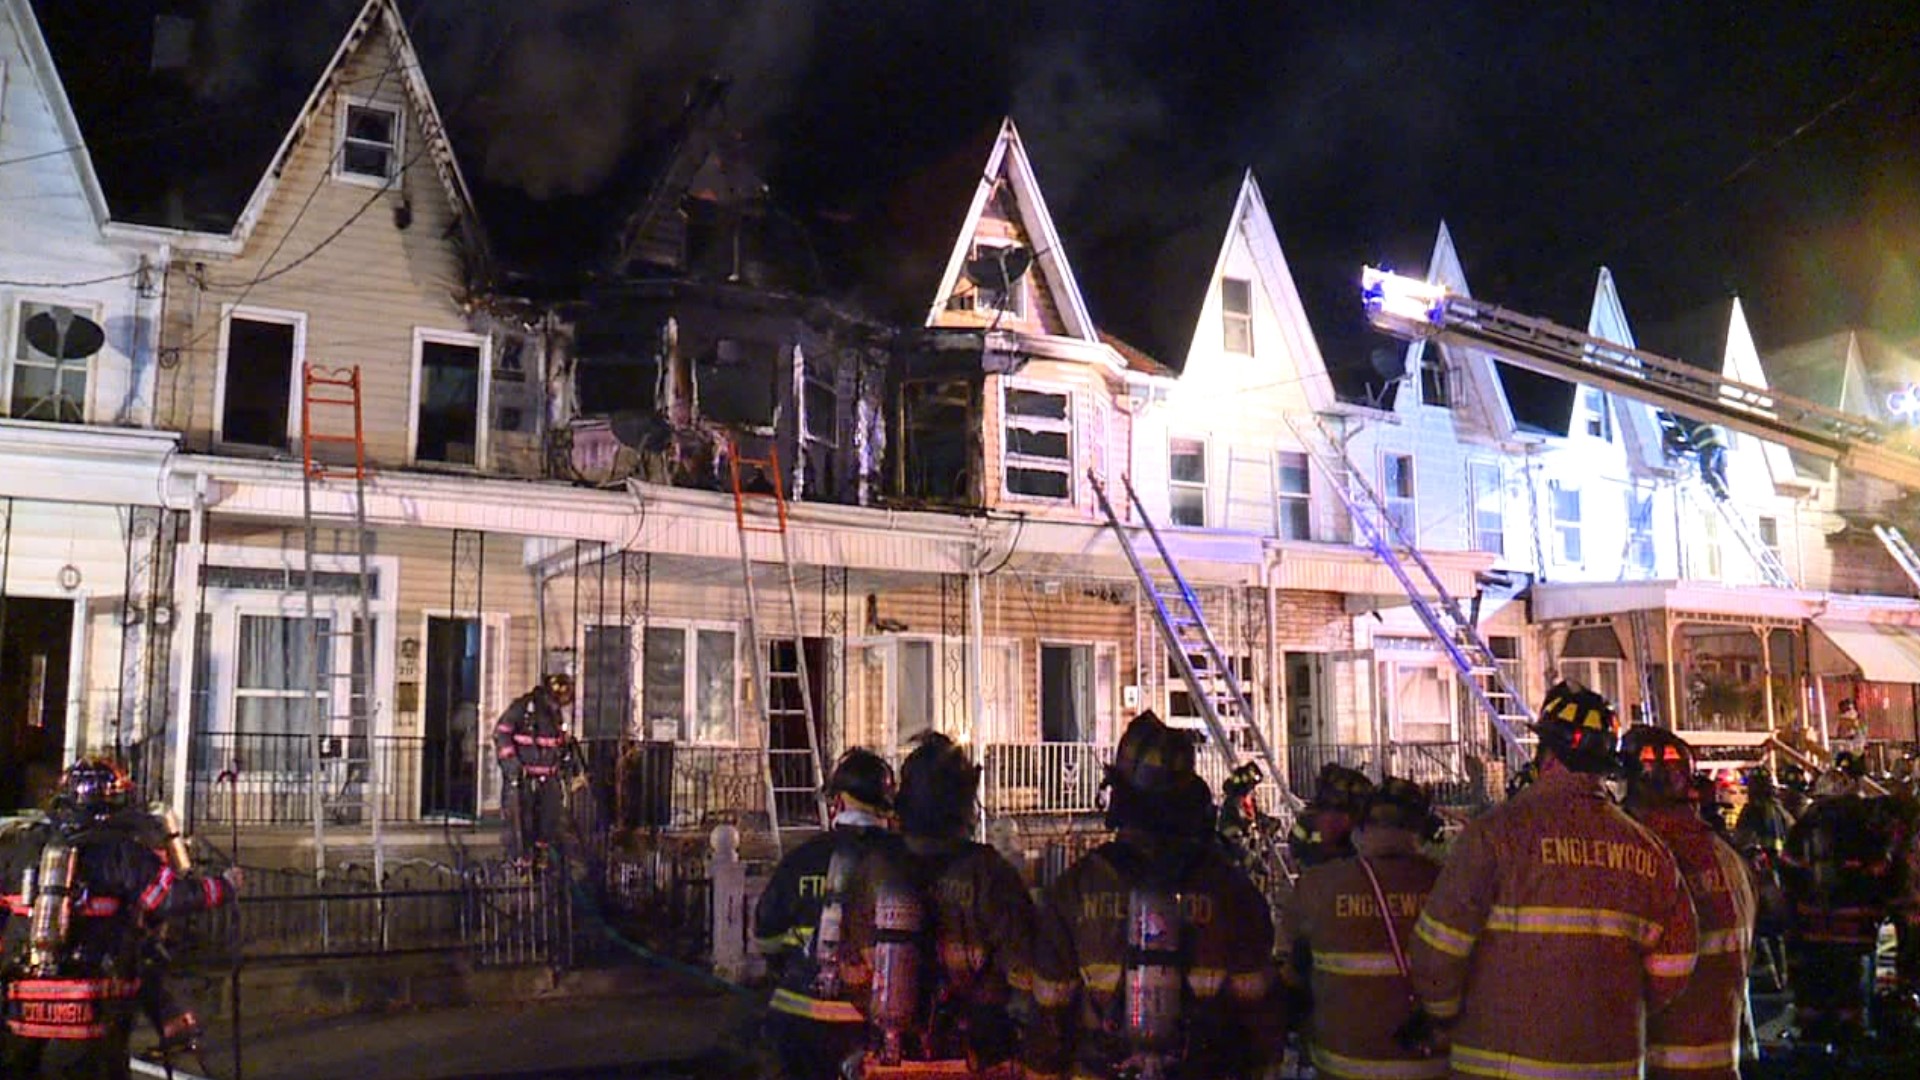 Two first responders that fought the early morning fire Monday lived in the homes damaged by the blaze.